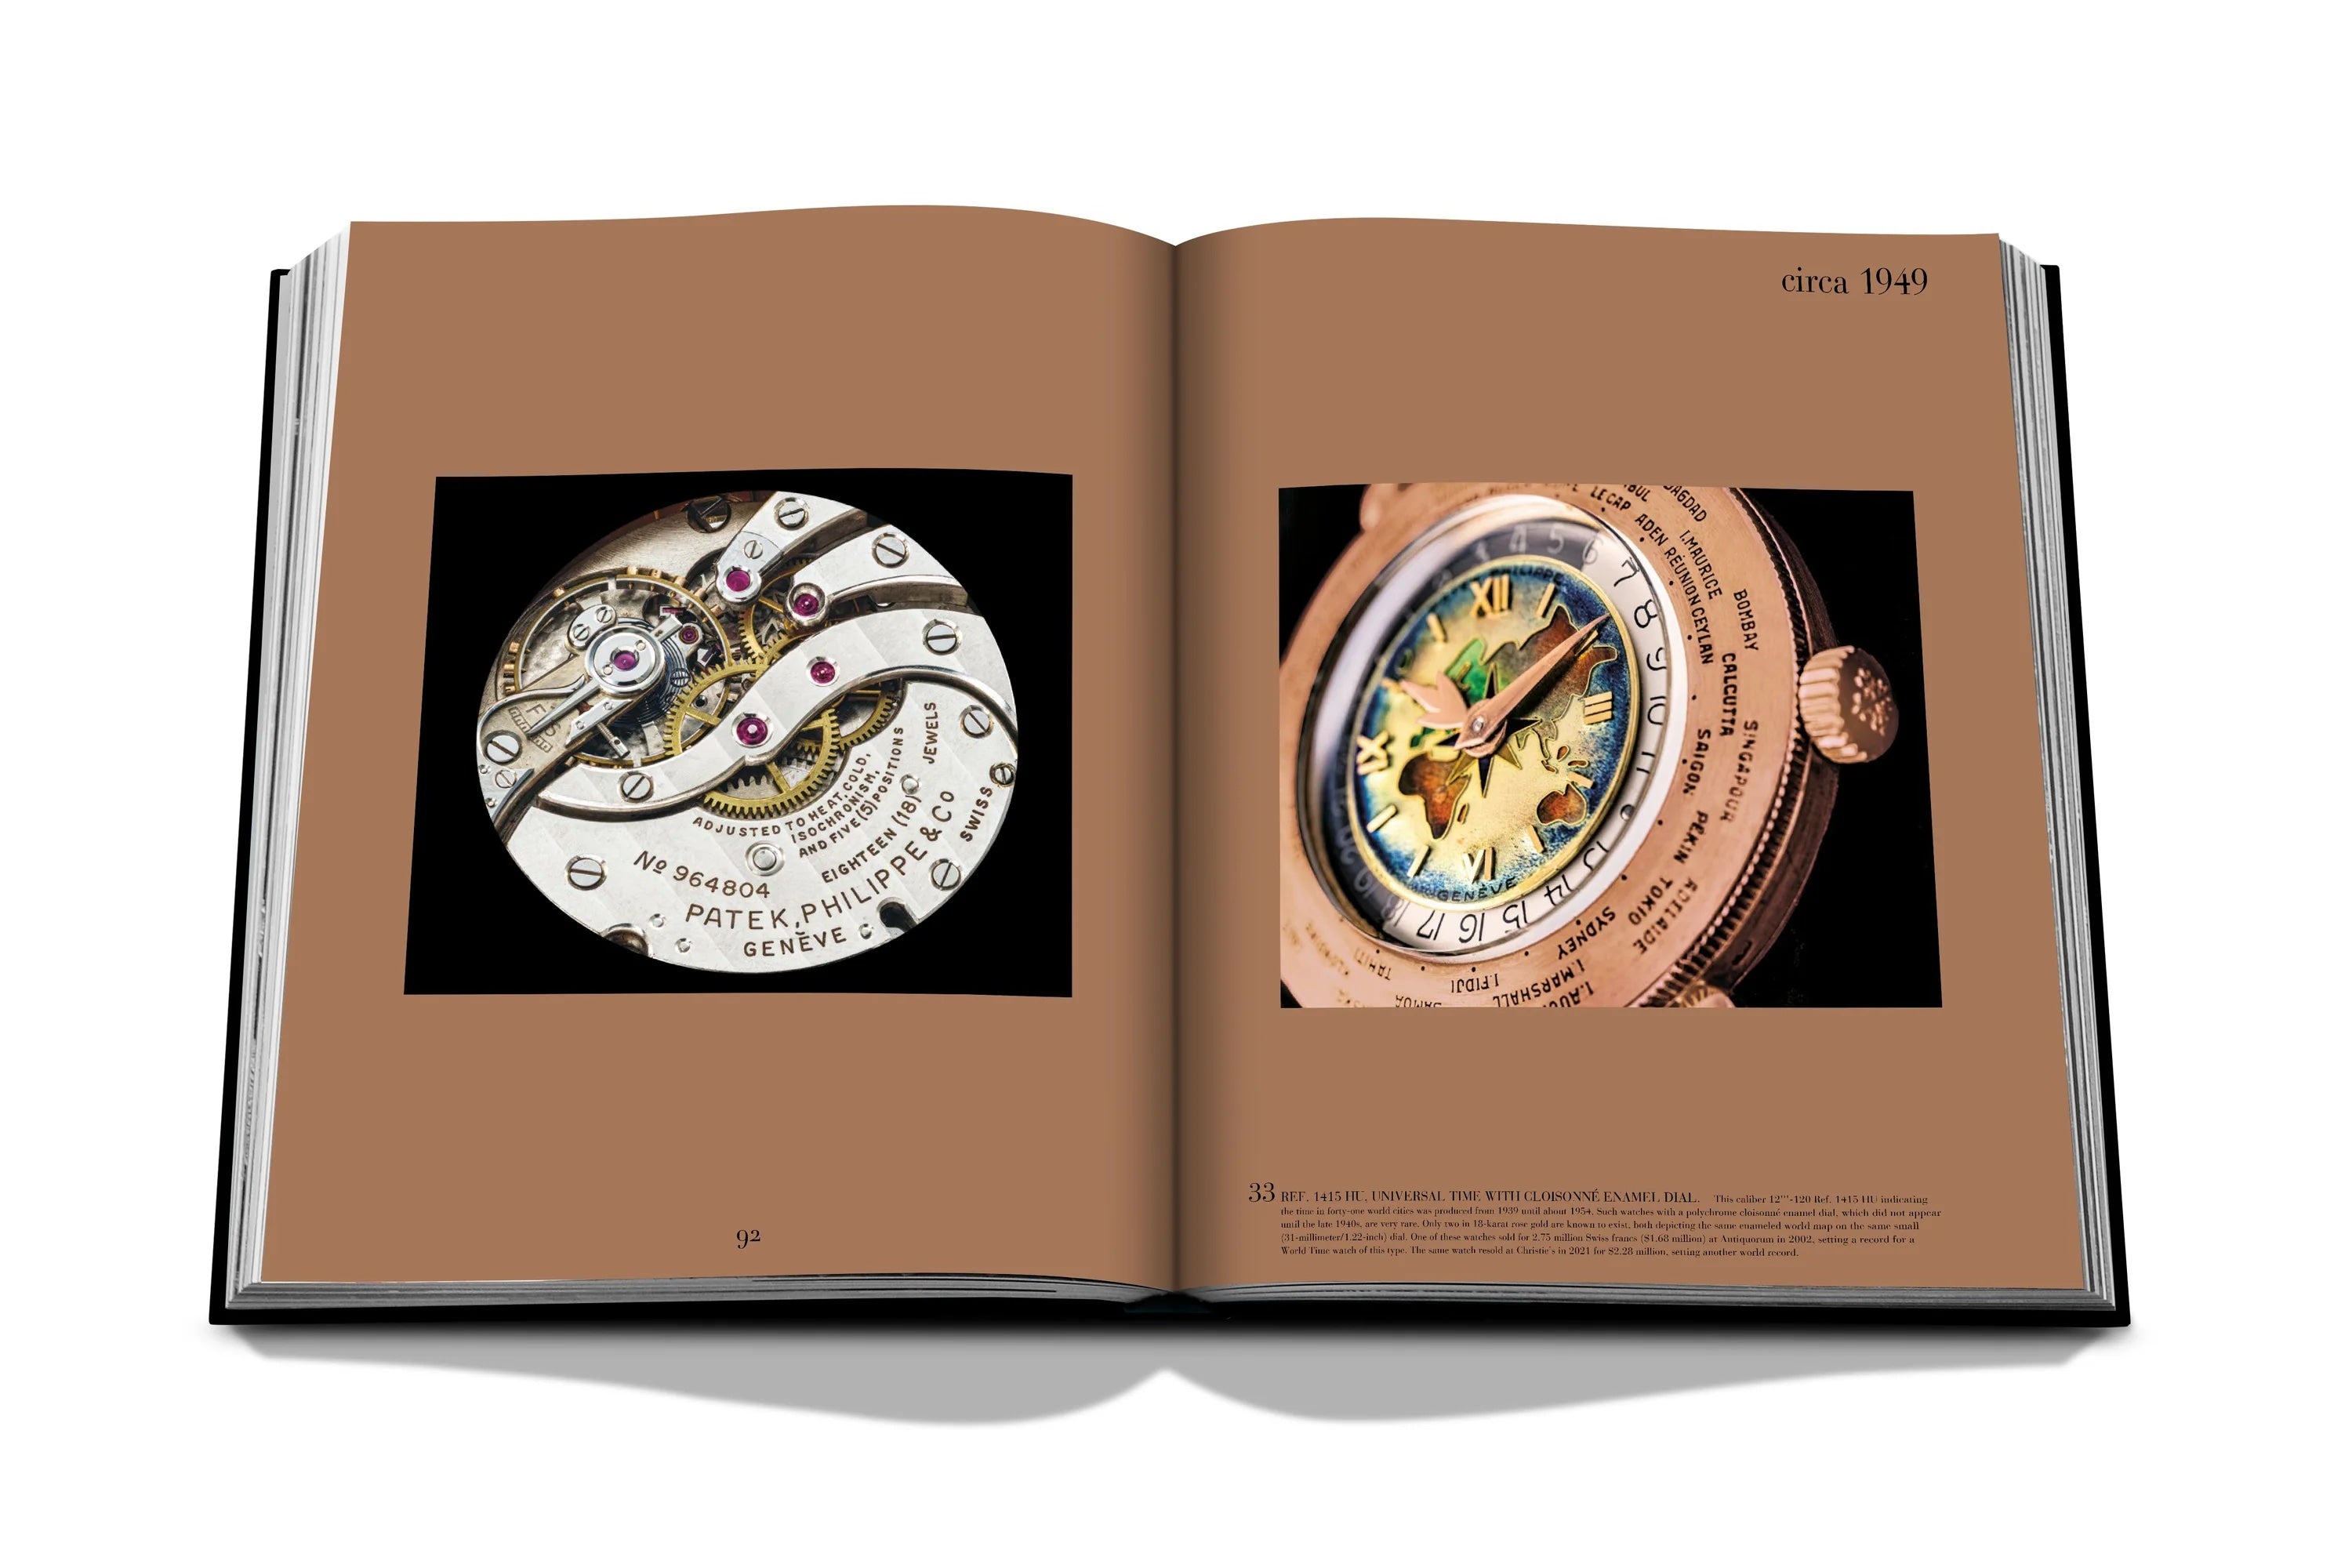 The Impossible Collection of Patek Philippe